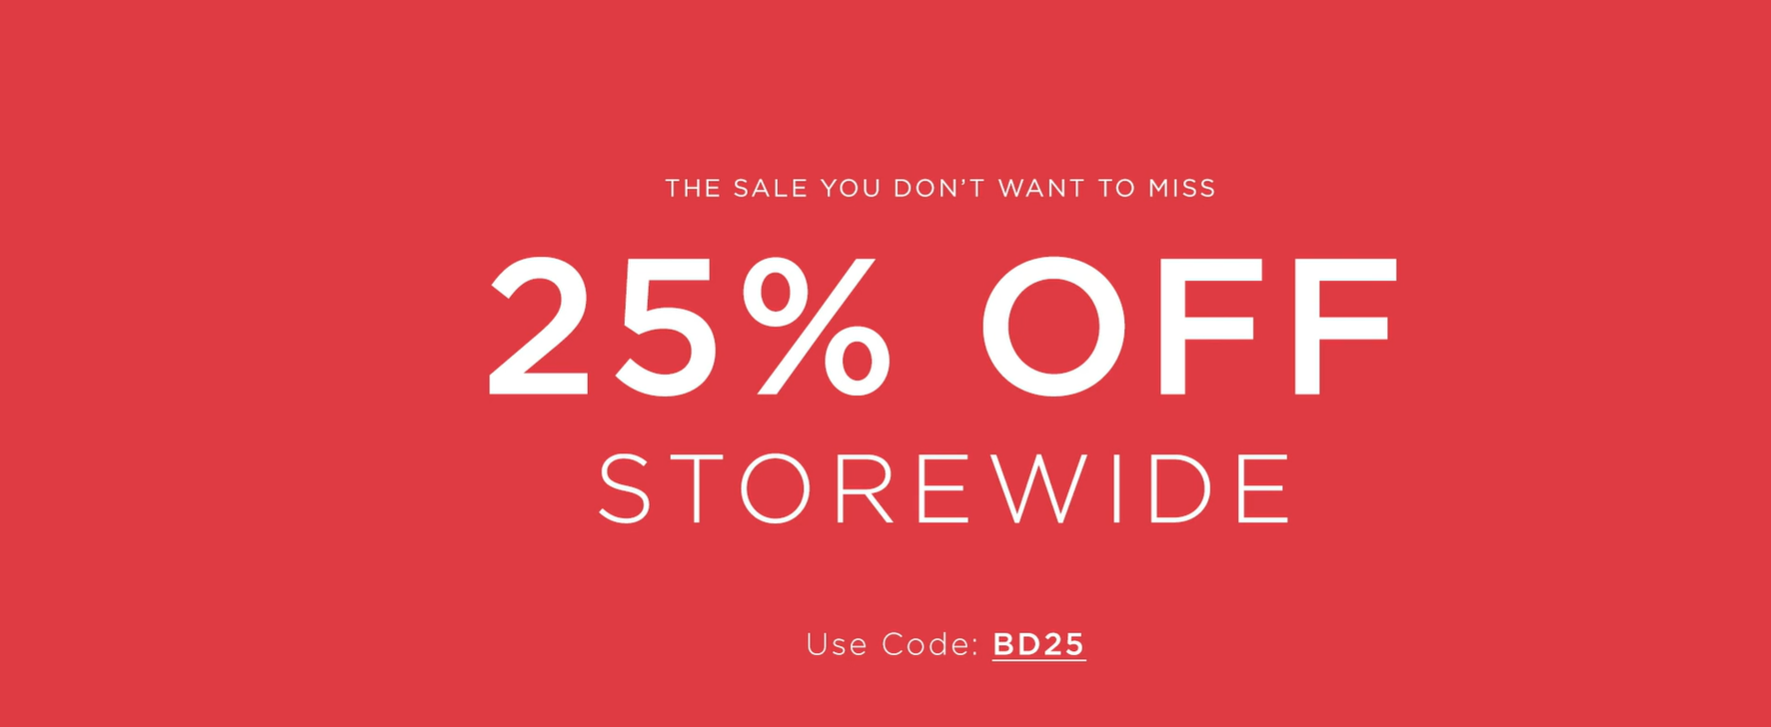 Forcast Boxing Day - 25% OFF storewide with coupon